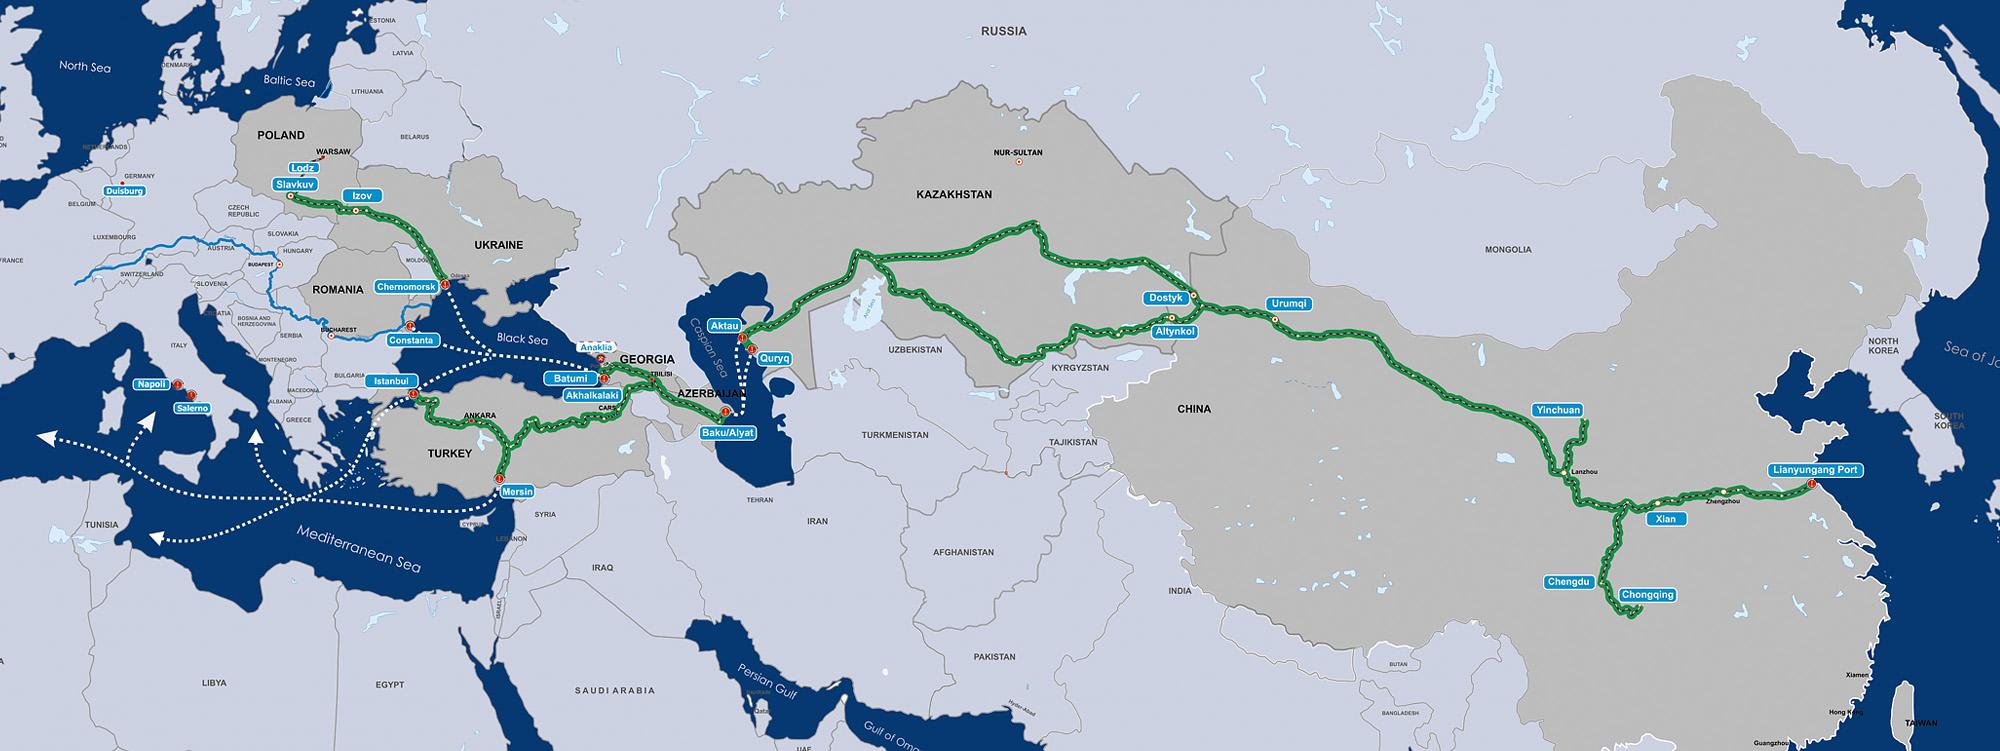 Tracking Trans Continental Connections: China Inaugurates a New Transcontinental Freight Train Route Through the Caspian Region